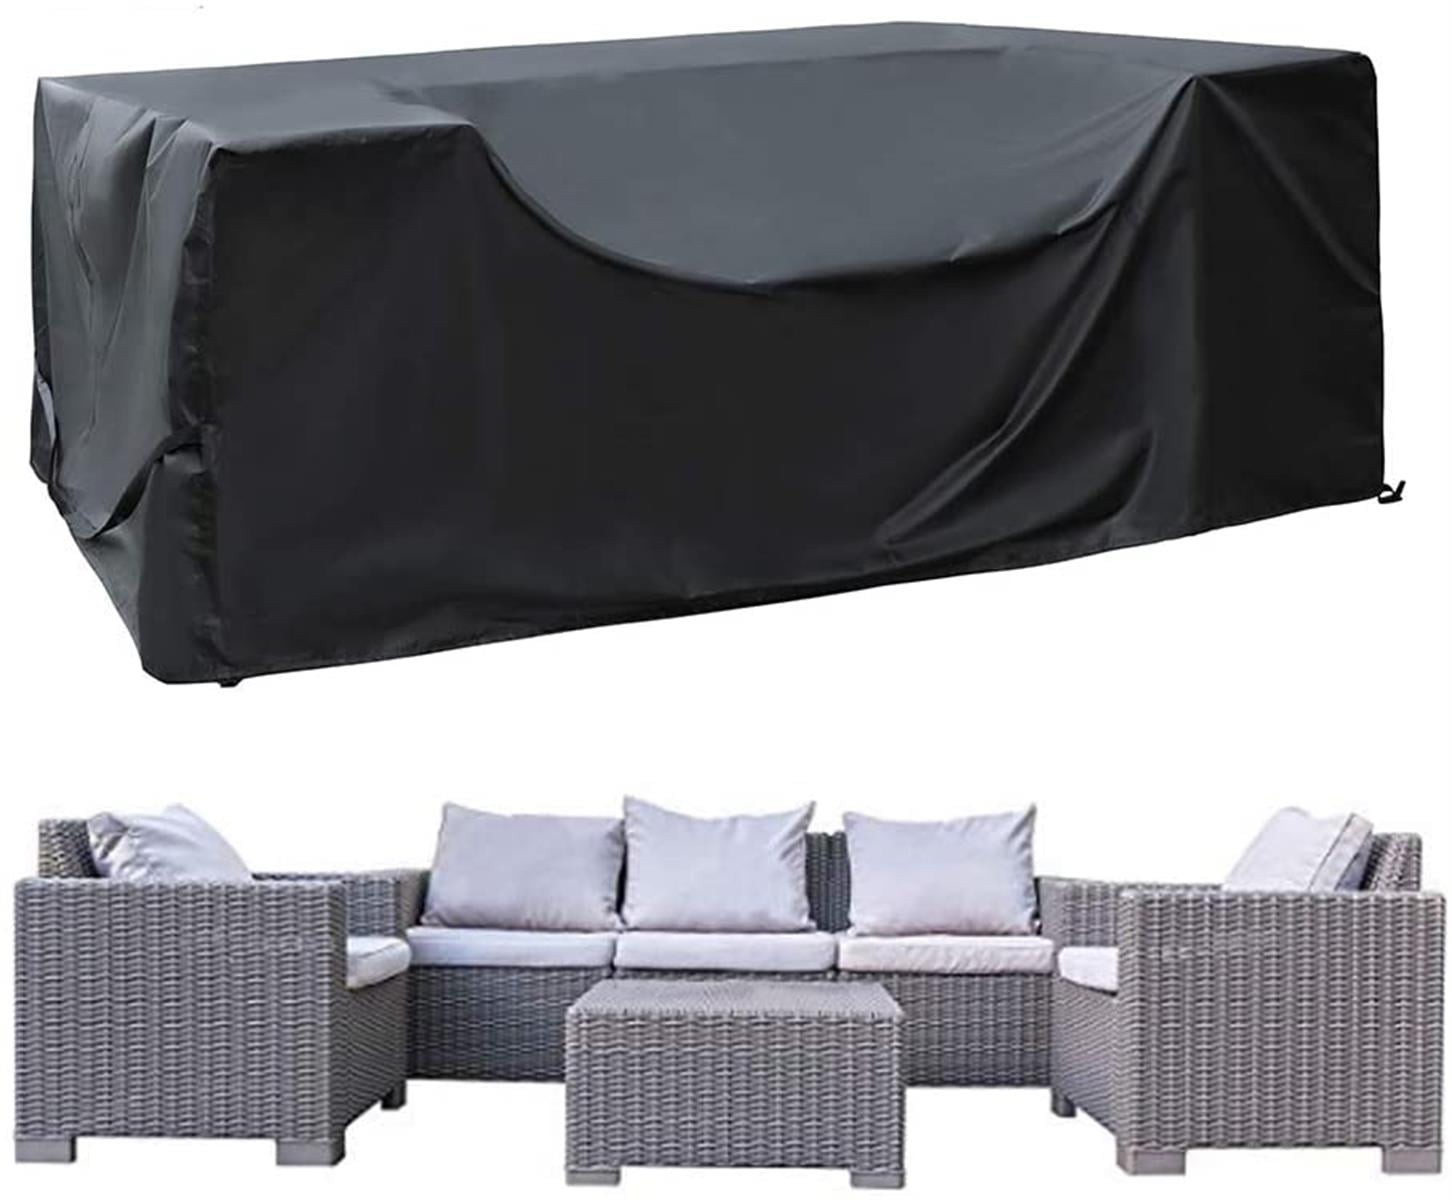 PICTURESQUE Oxford Sofa Protective Cover Waterproof Tear-resistant Garden Sofa Furniture Covers Black S